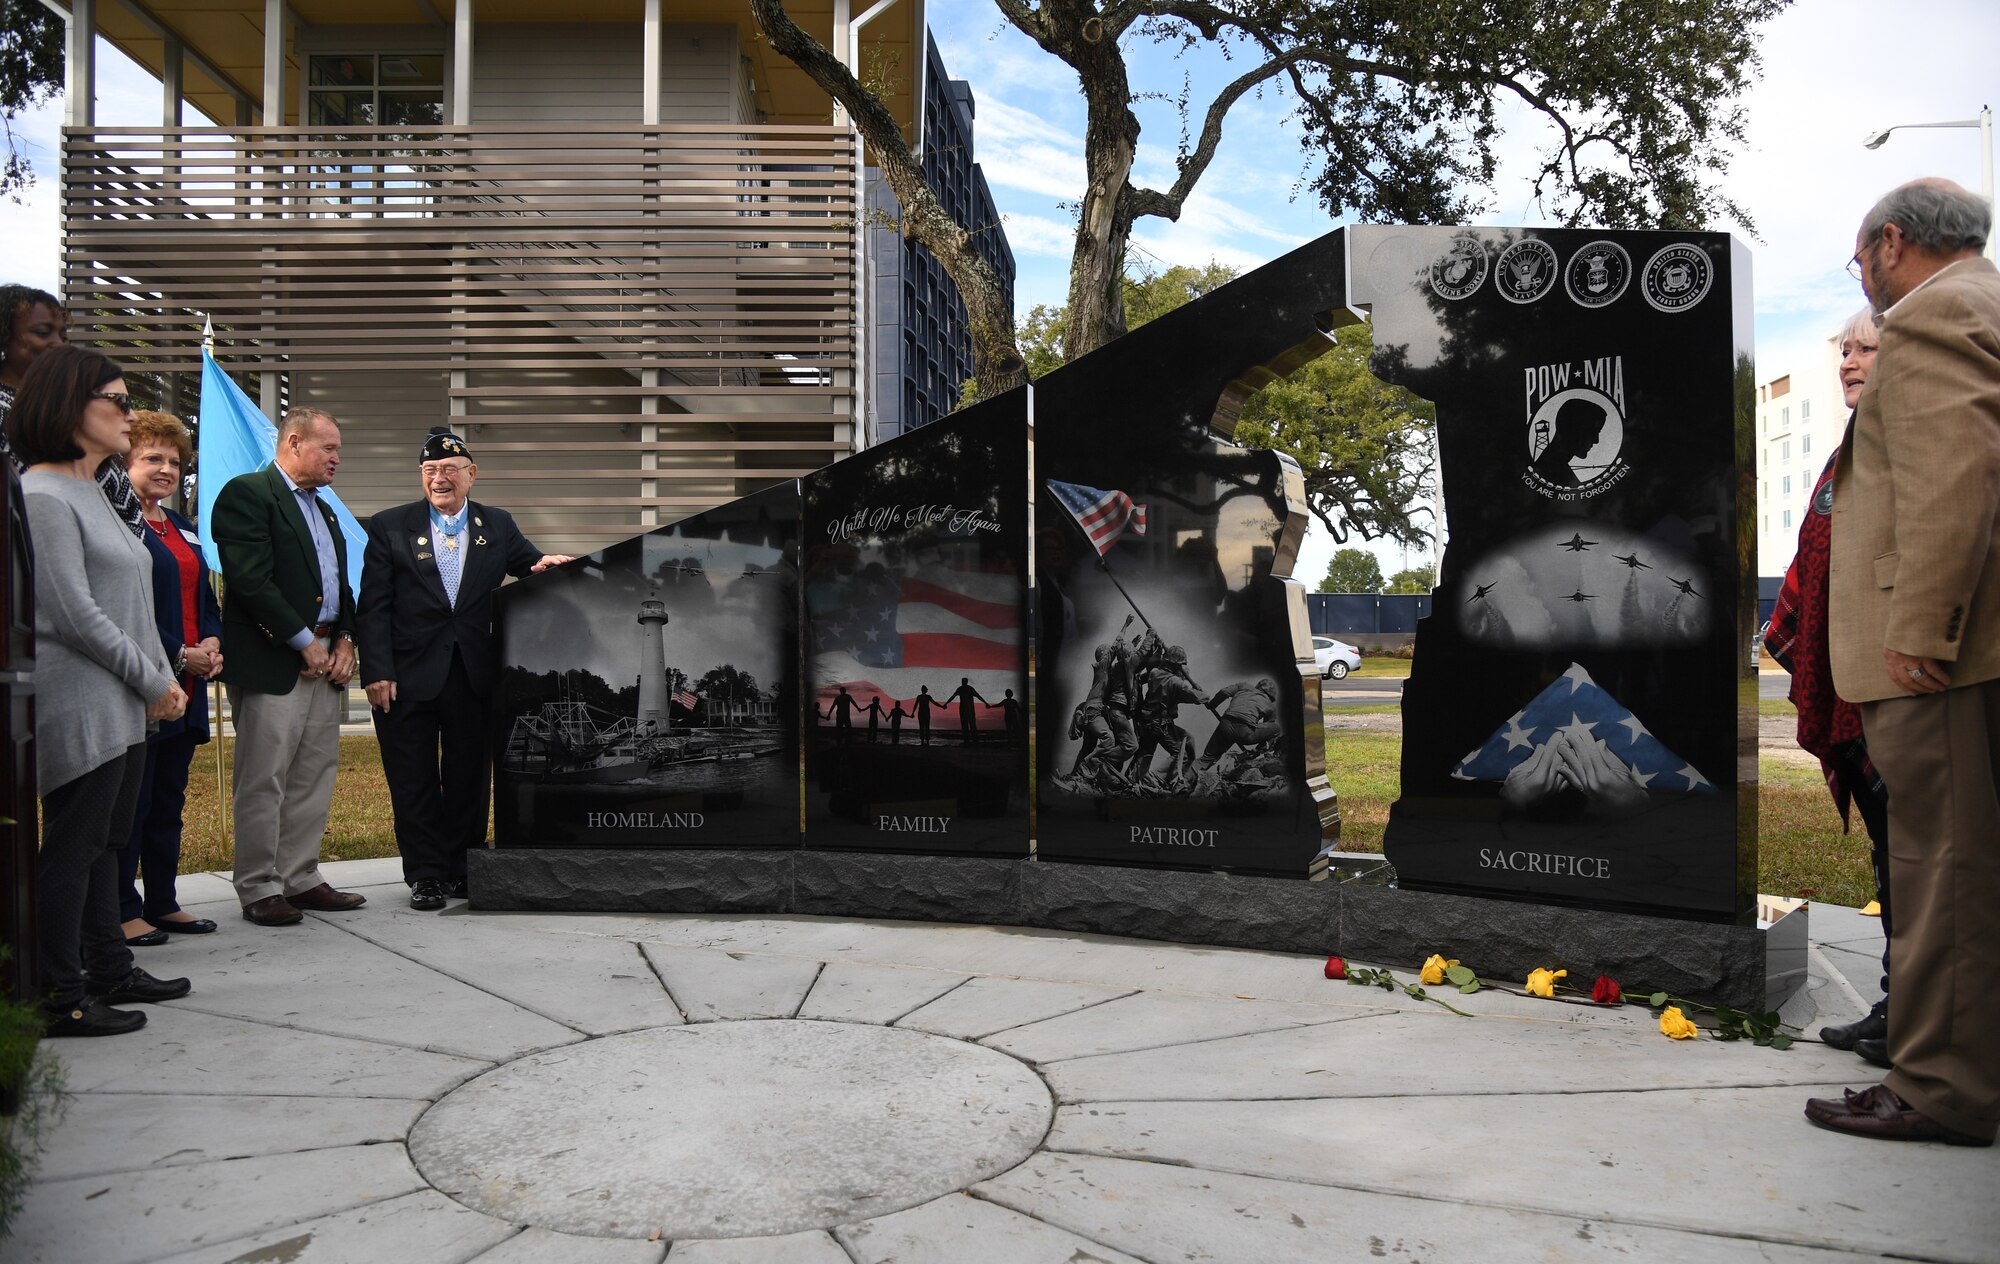 The 58th Gold Star Families Memorial Monument is unveiled during a dedication ceremony at Guice Veterans Memorial Park in Biloxi, Mississippi, Nov. 23, 2019. The monument honors families of service men and women who sacrificed their lives while serving in the military. (U.S. Air Force photo by Kemberly Groue)